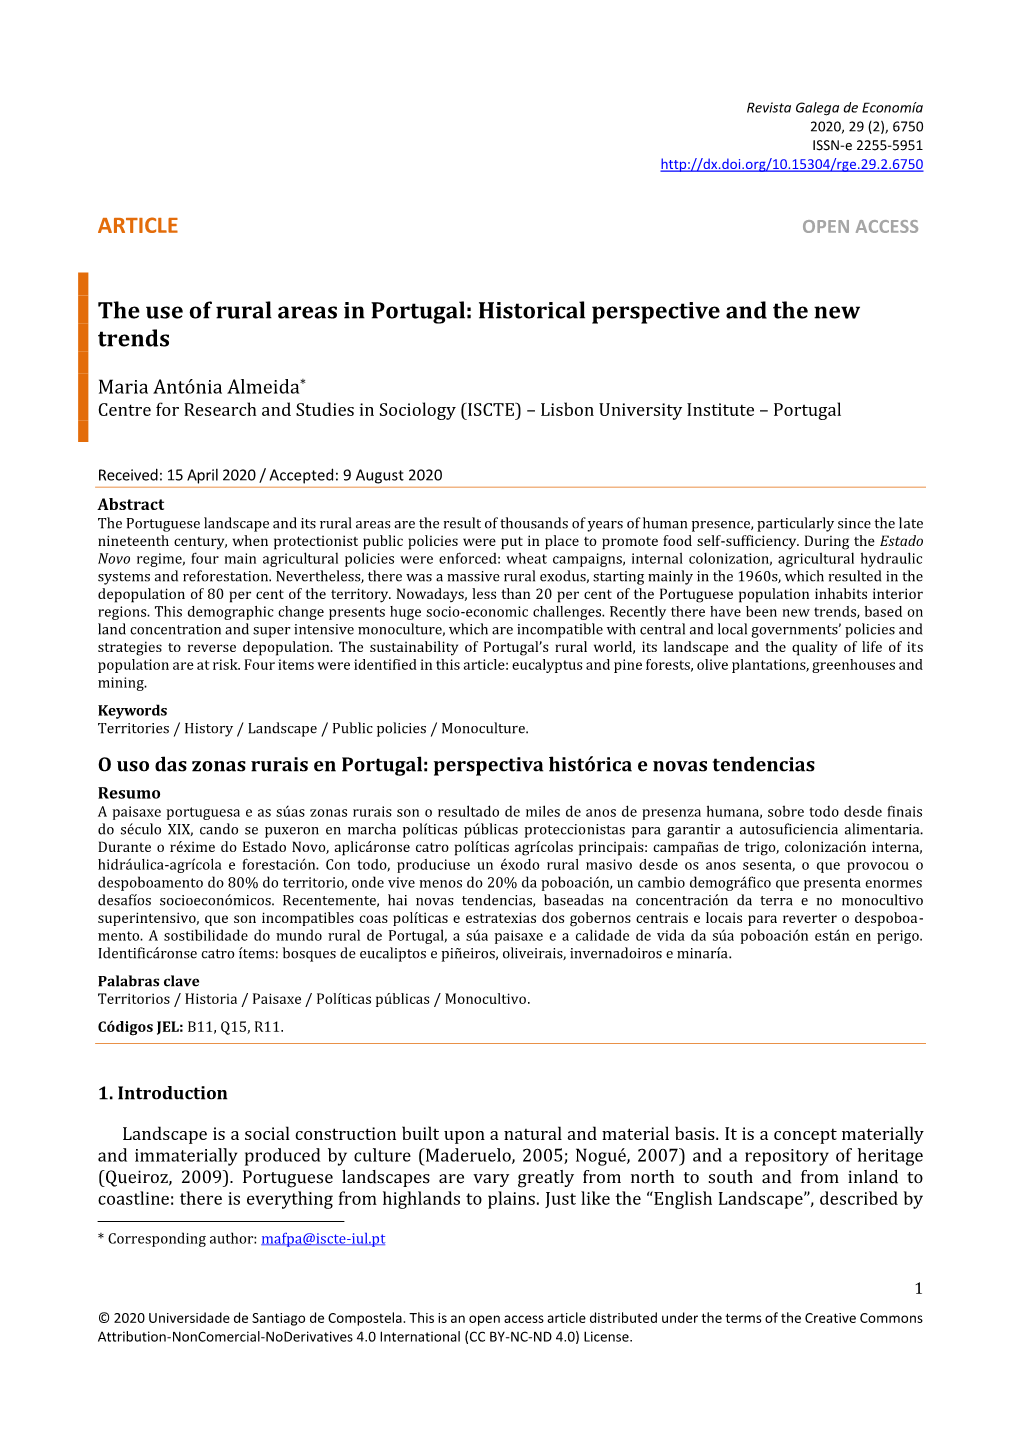 ARTICLE the Use of Rural Areas in Portugal